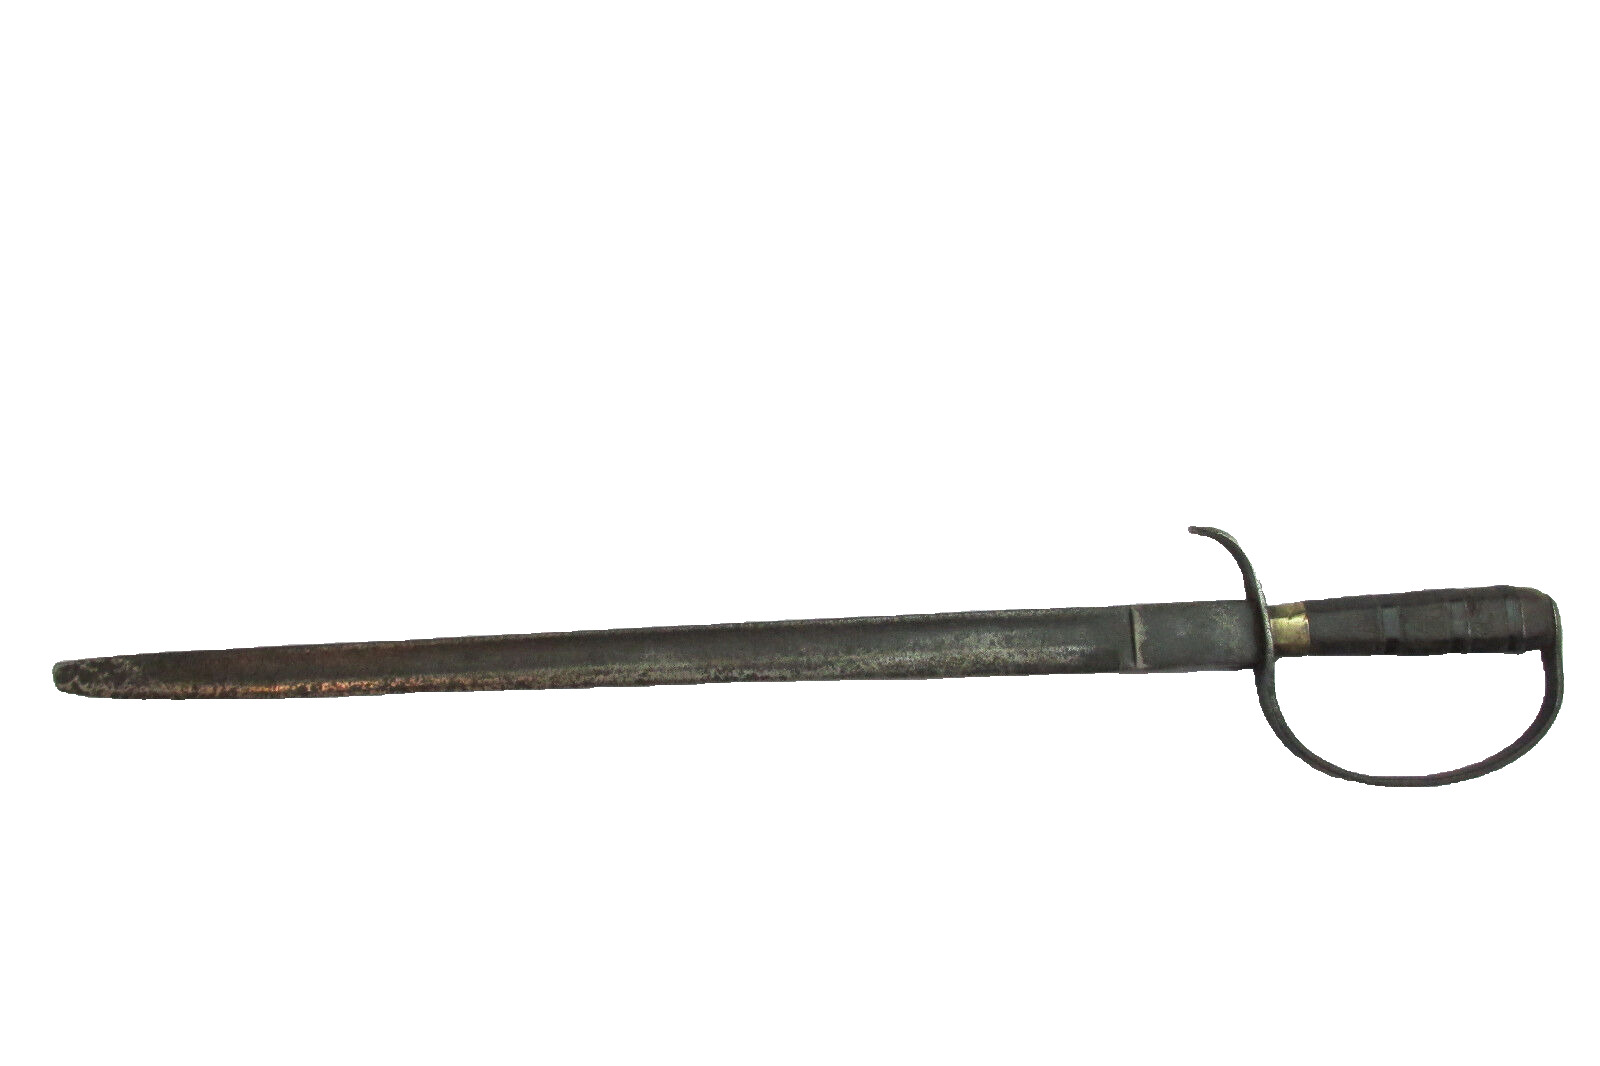 Naval boarding sword c1840 with leather sheath with metal. Military object